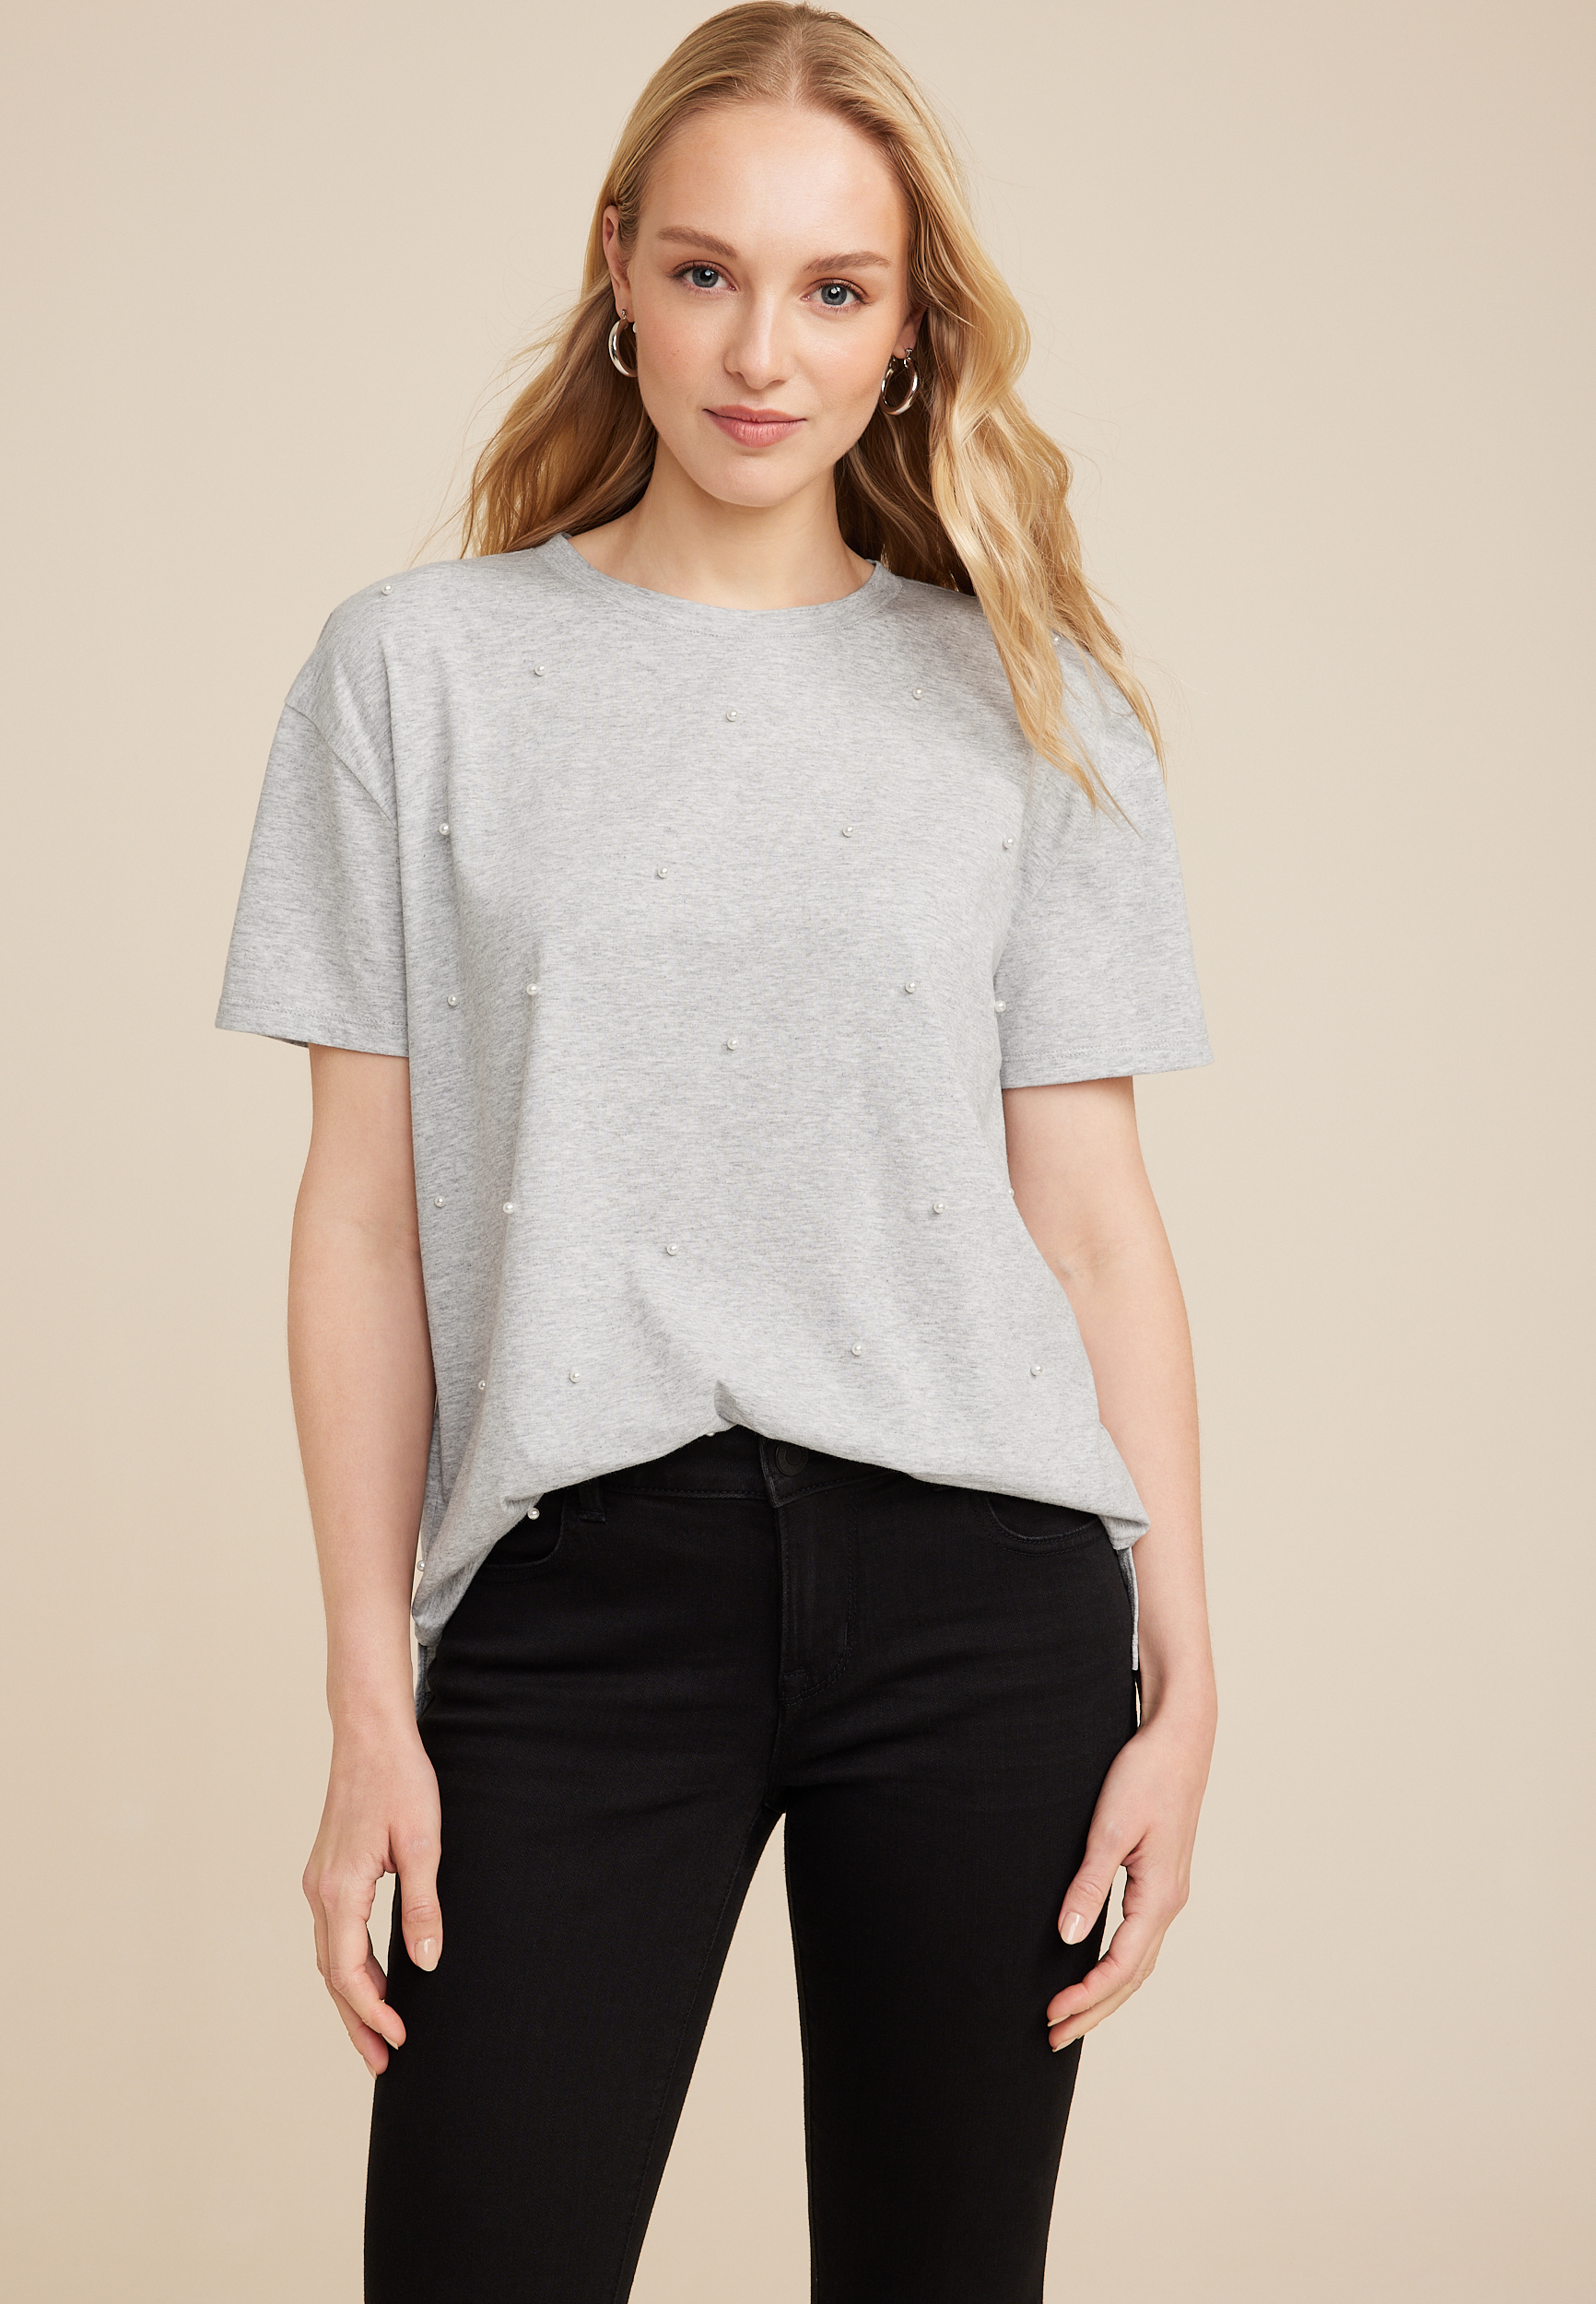 edgely™ Pearl Embellished | Tee maurices Crew Neck